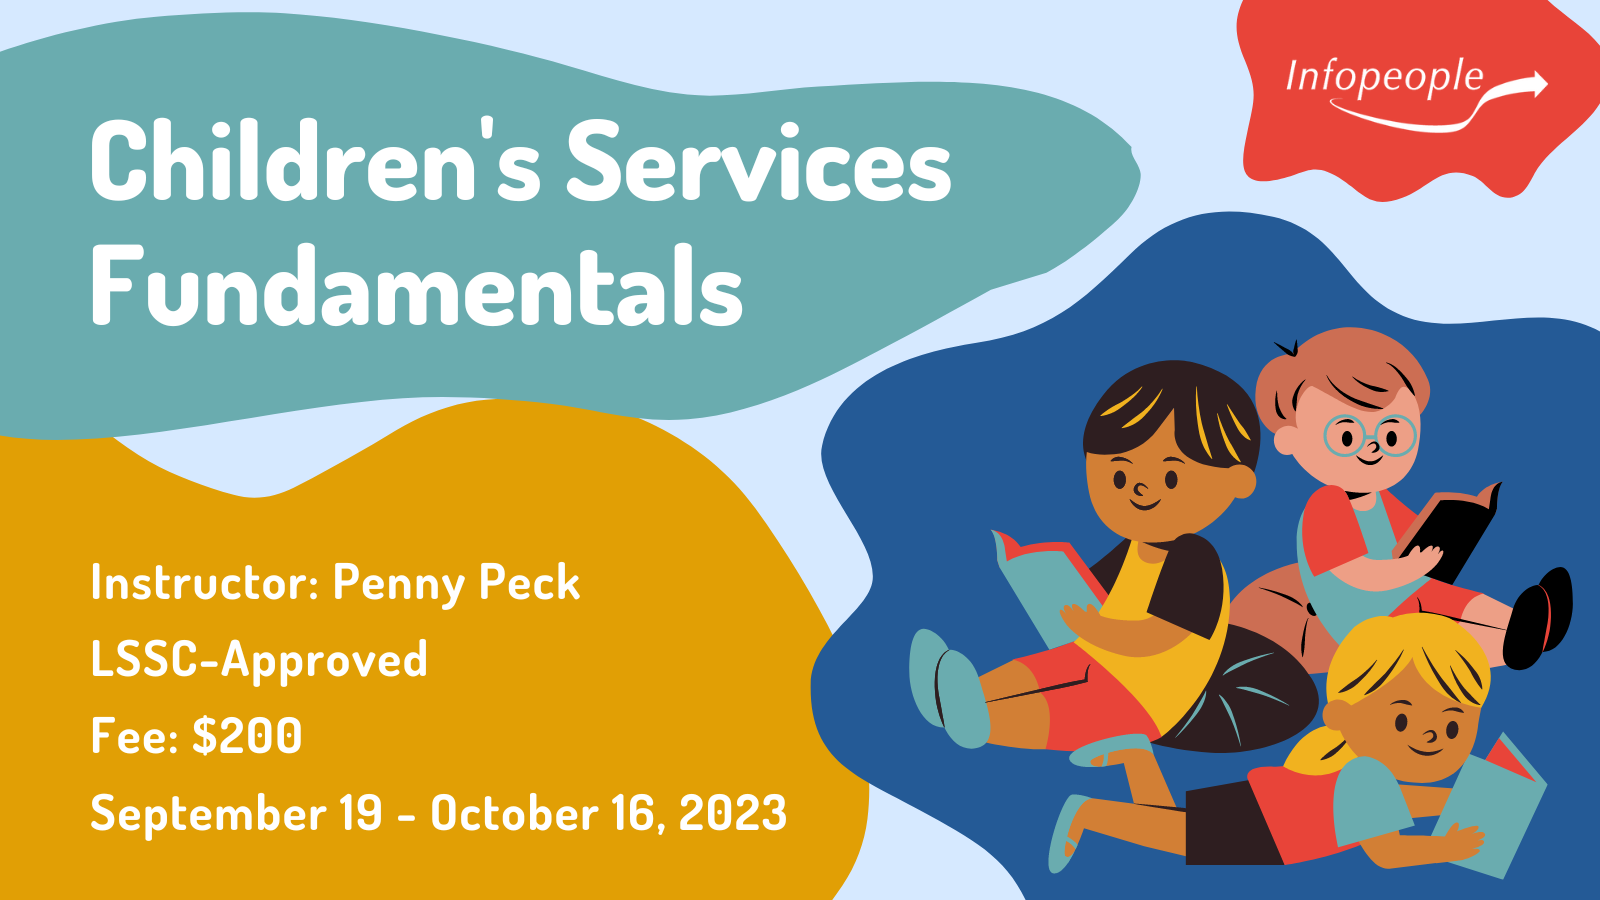 Children's Services Fundamentals - an Infopeople course. September 19 to October 16, 2023. LSSC-approved. Instructor: Penny Peck. Fee: $200. Three children sitting on the ground reading.